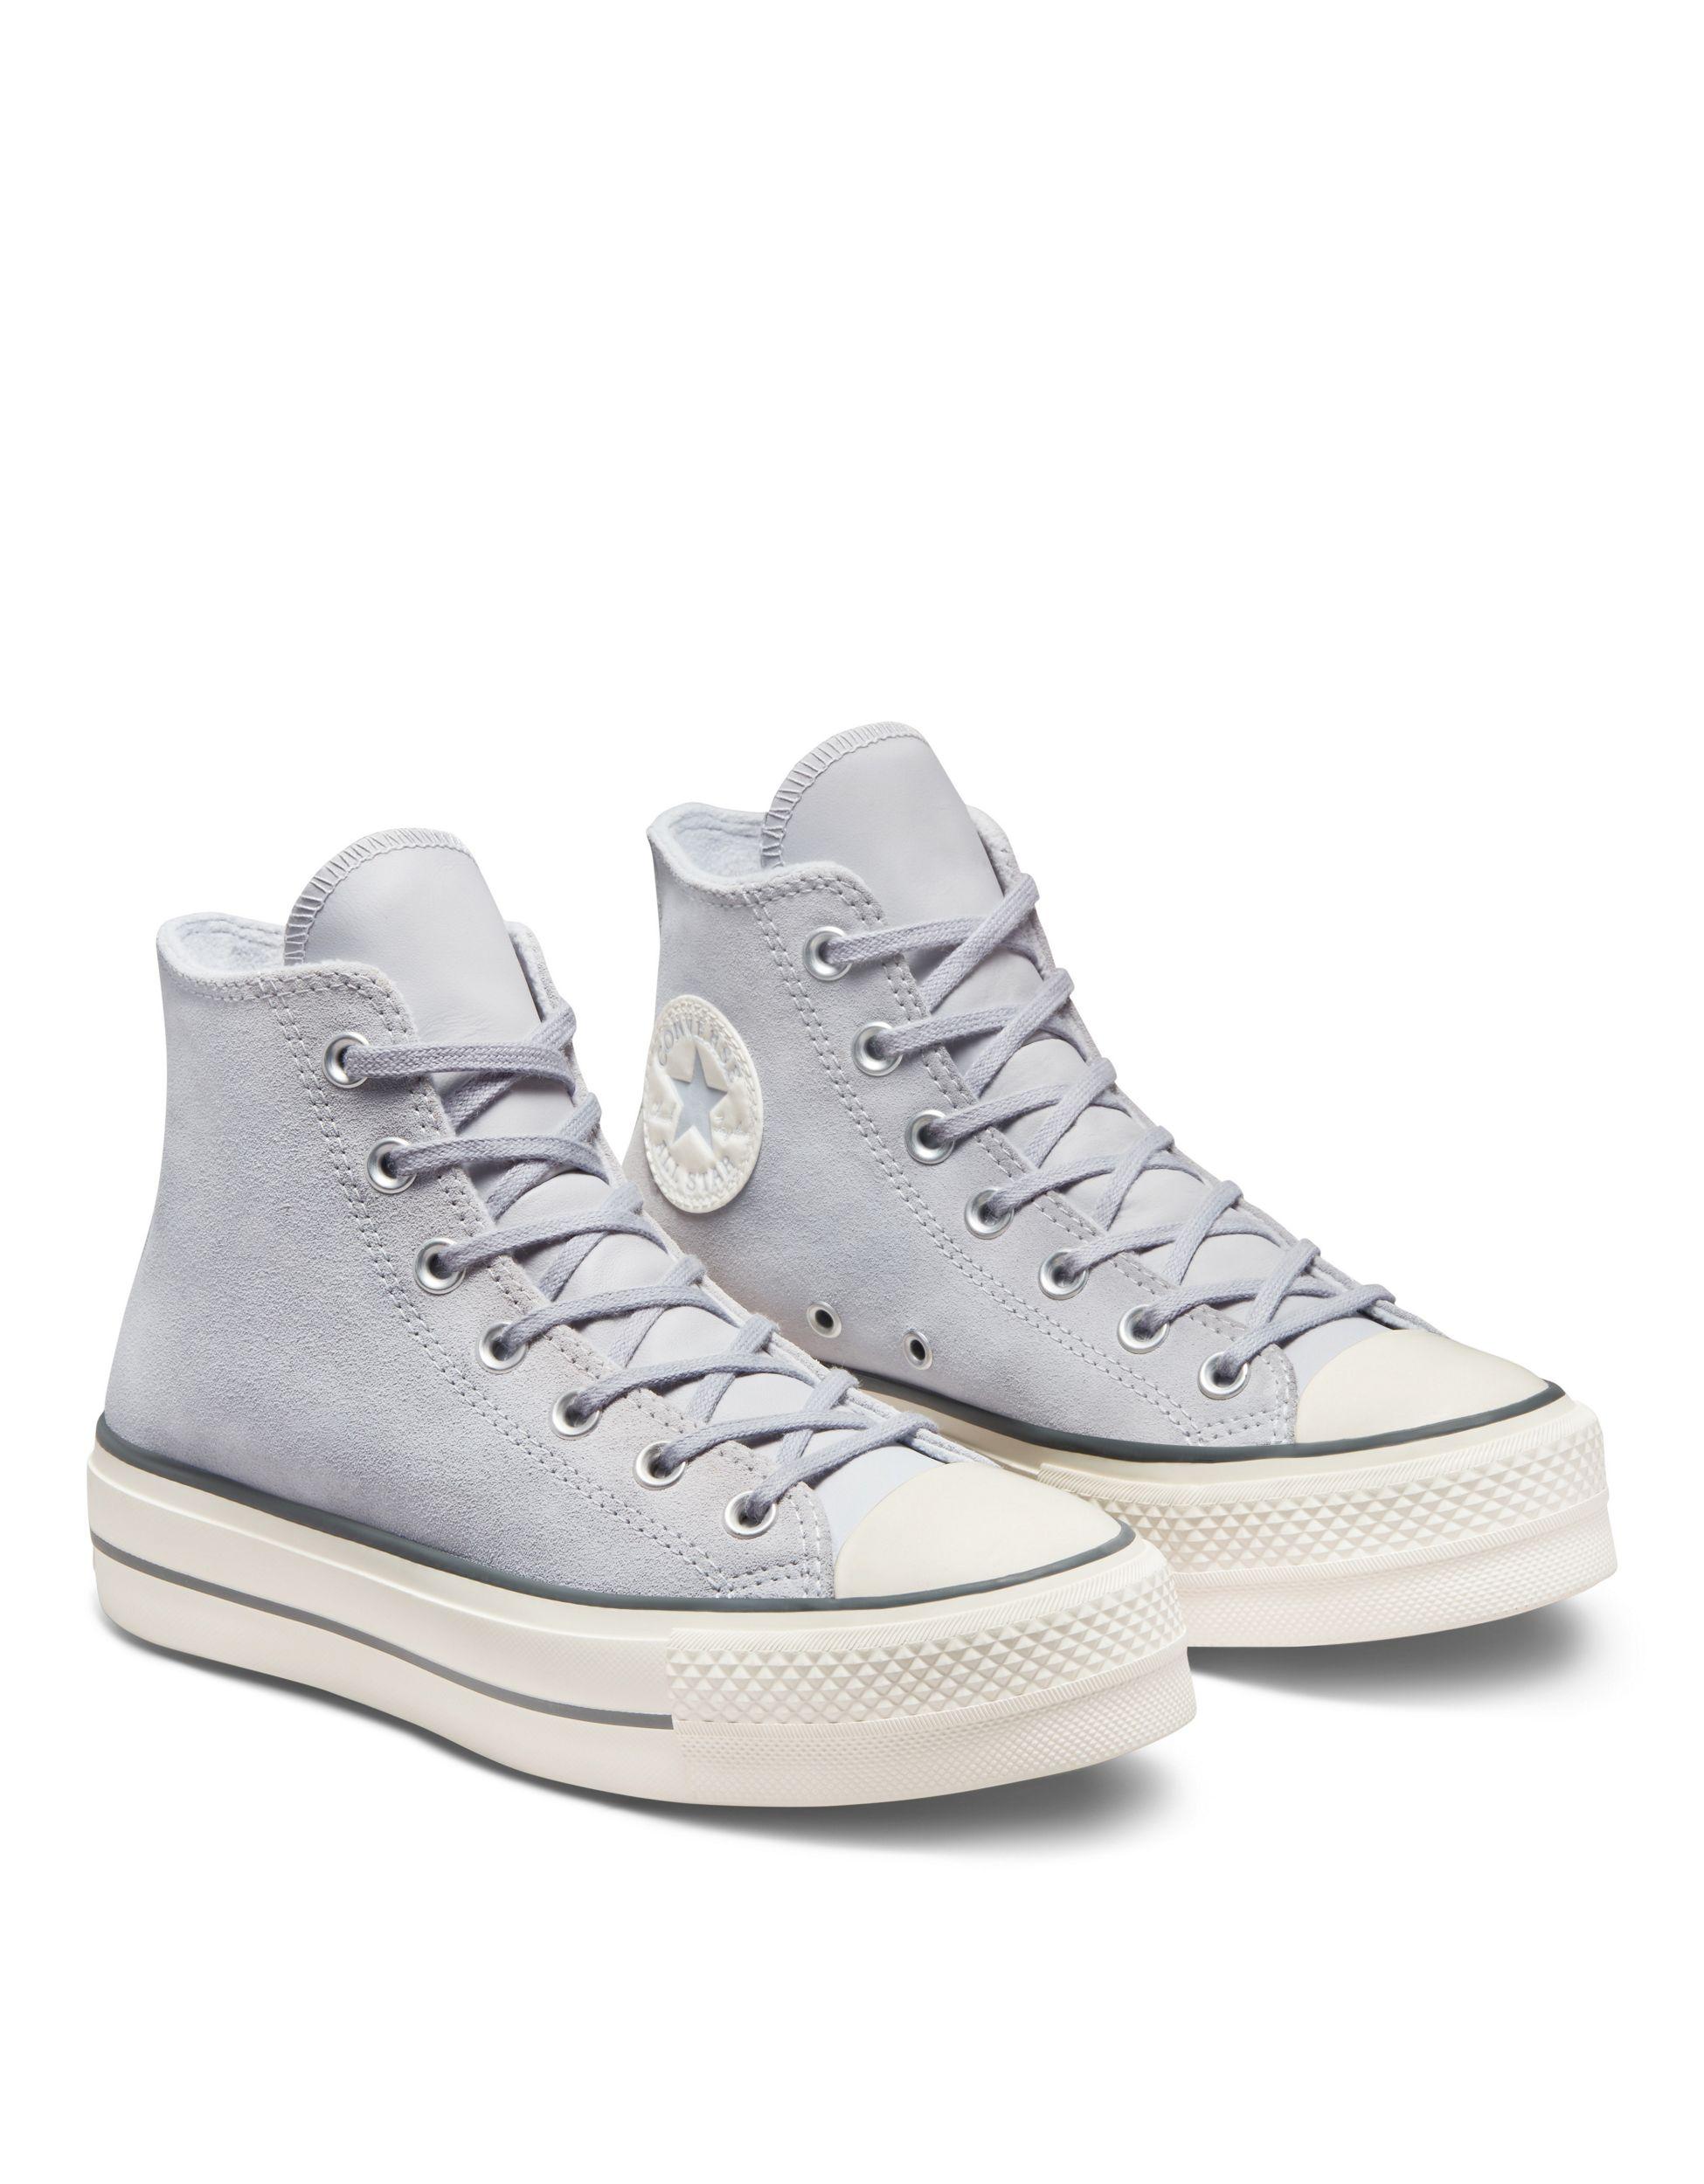 Converse Chuck Taylor All Star Lift Cozy Utility Sneakers in White | Lyst